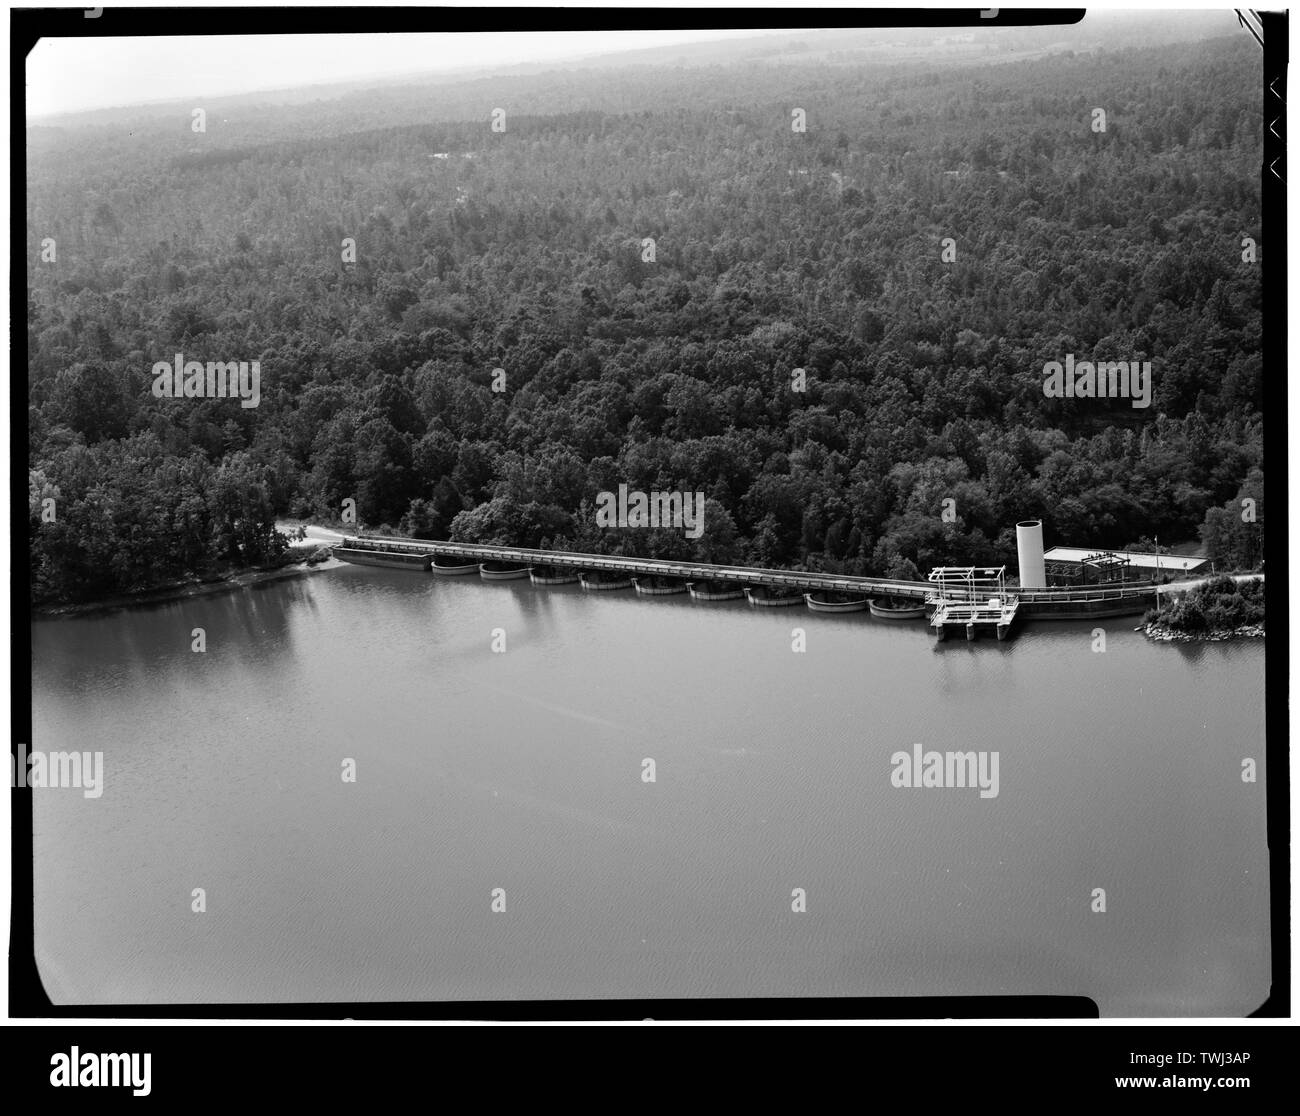 Secession Lake dam- aerial view from lake looking towards dam - Abbeville Hydroelectric Power Plant, State Highway 284 and County Road 72, Rocky River (historical), Abbeville County, SC; Abbeville Water and Electric Plant Company; Pennell, James Roy; White, W H; Abbeville Power Company Incorporated; D.M. Rickenbacker Construction Company; Townsend, C P; Wideman and Singleton; Britton, John B; S. Morgan Smith Company; Woodward Governor Company; Bethlehem Steel Company; Westinghouse Corporation; Bush Sulzer Brothers Company; Mark Brothers; Cary, Brian, transmitter Stock Photo